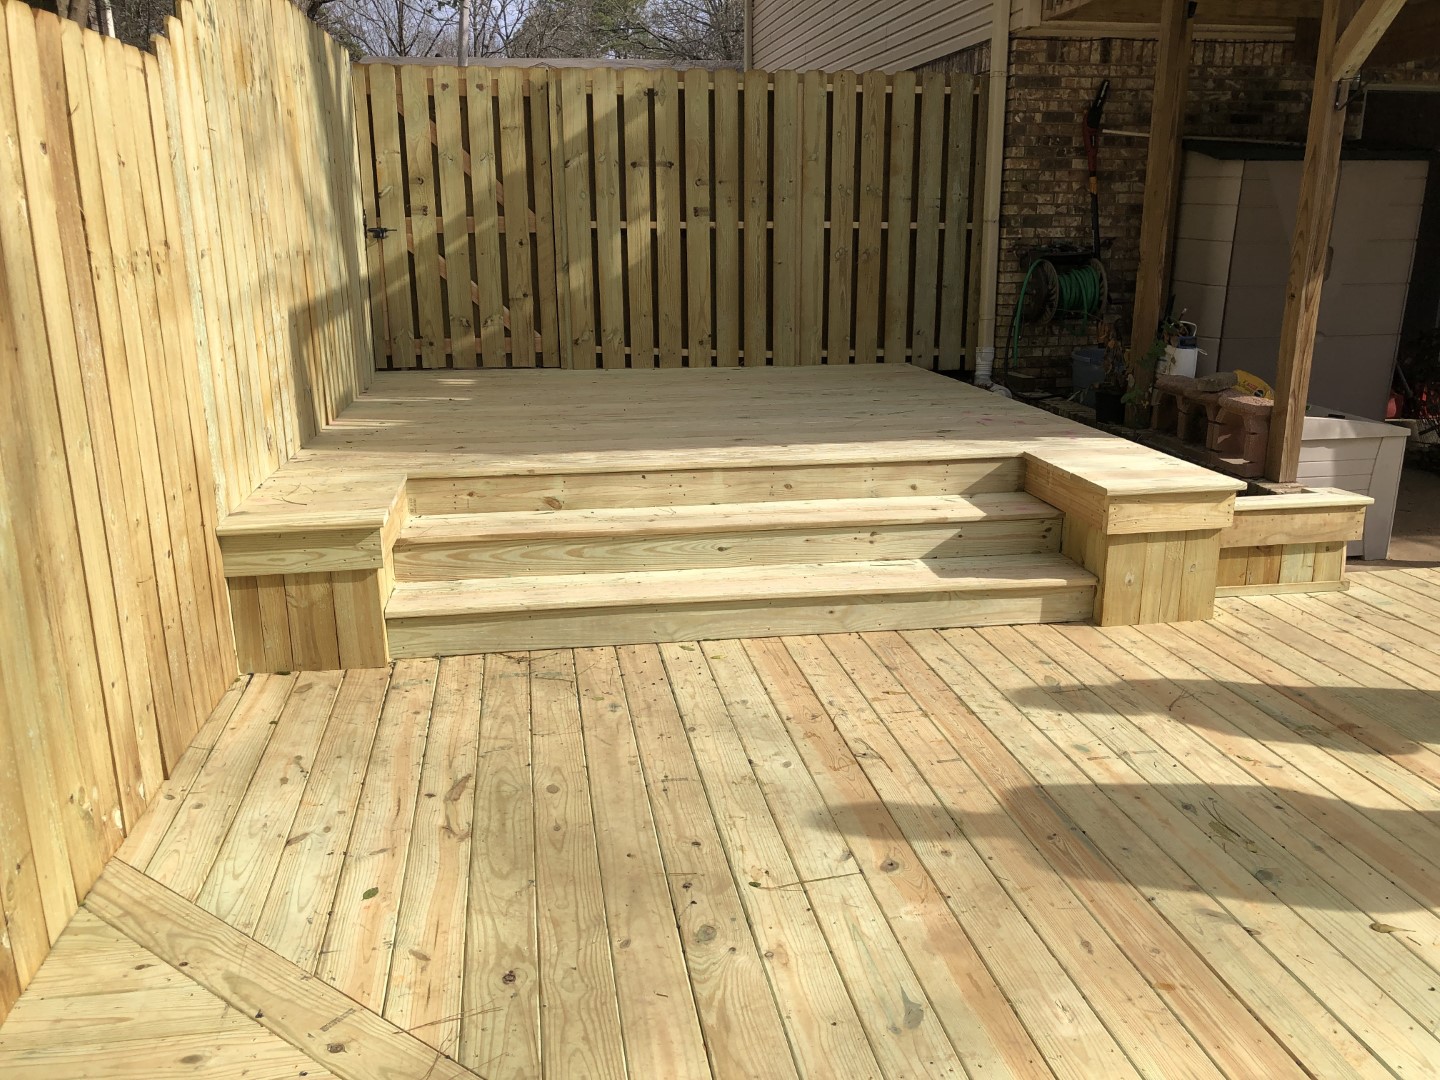 Steps that recess into the deck area